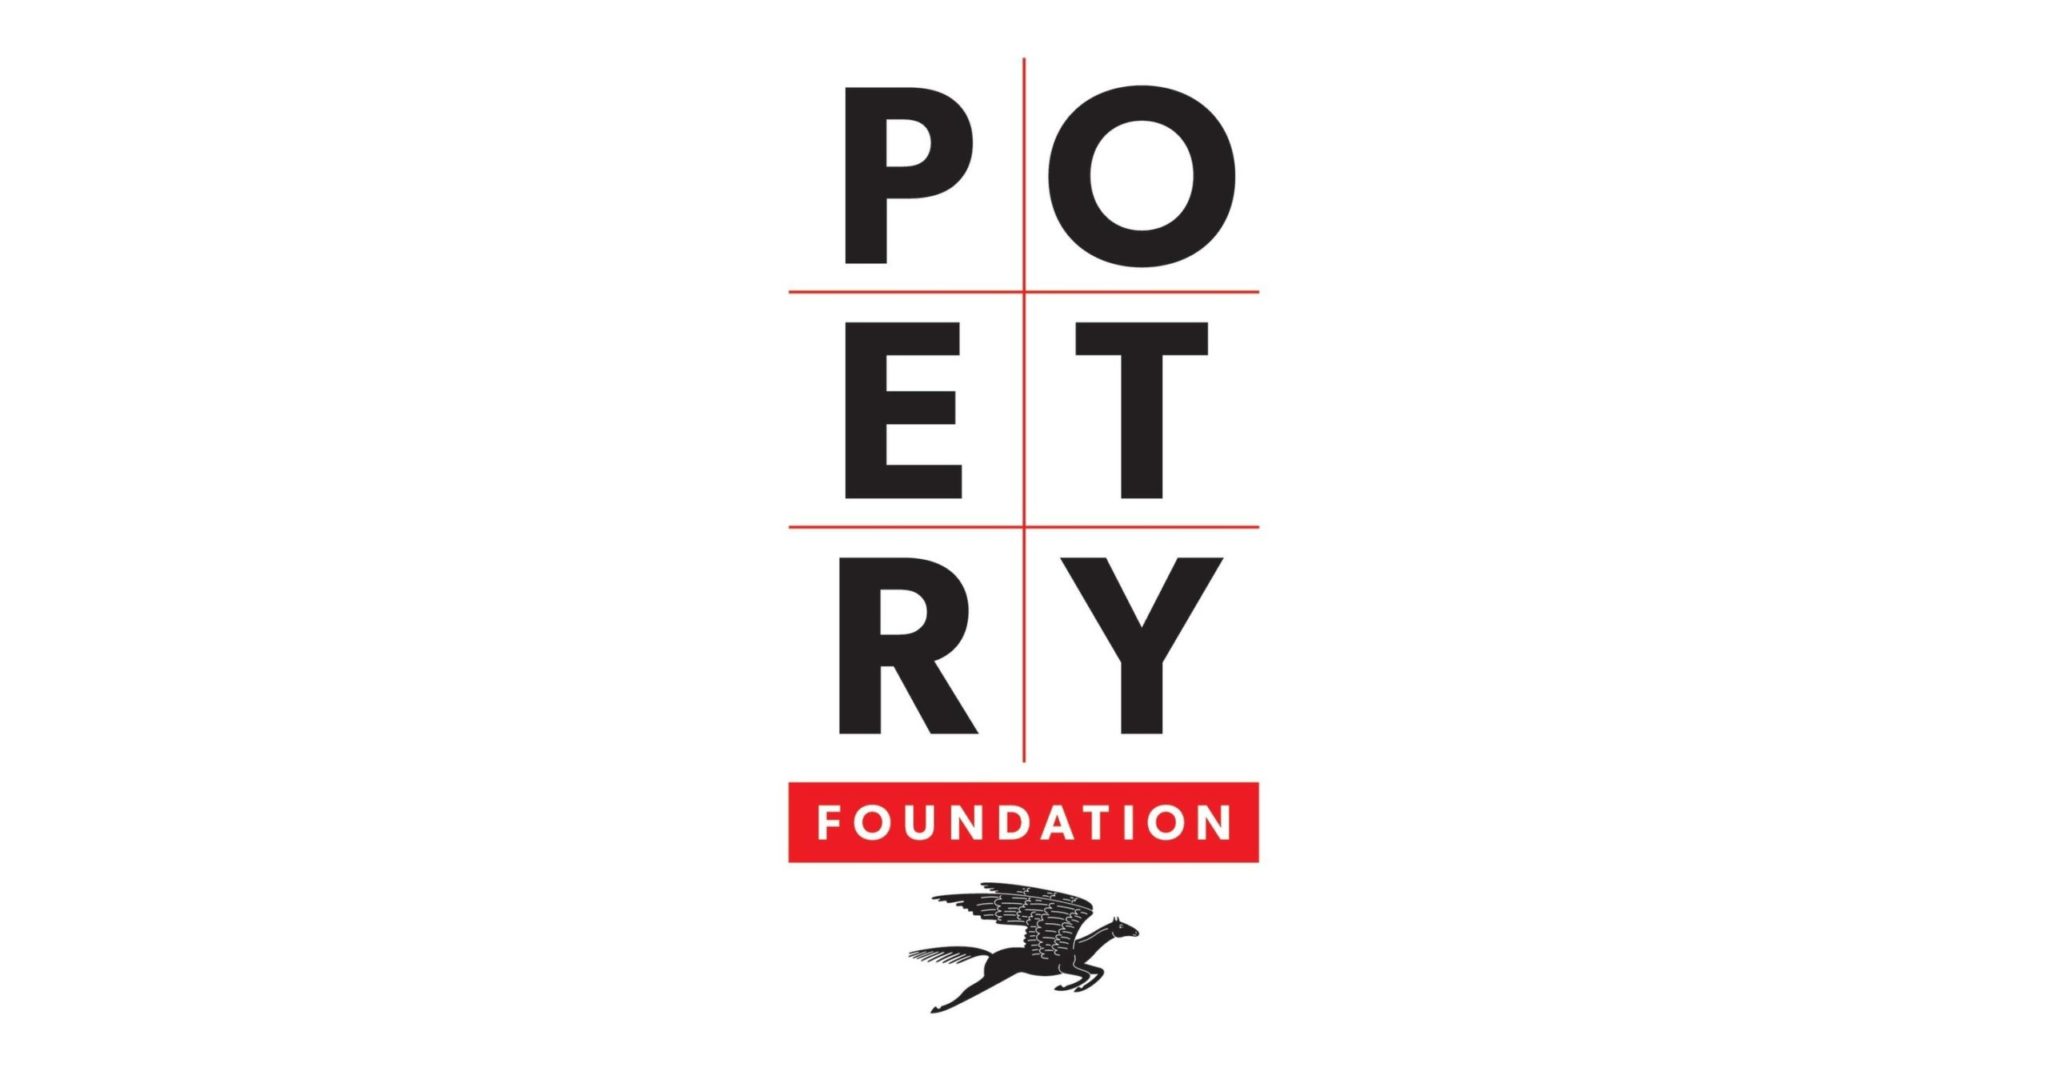 logo for the Poetry Foundation showing the capital letters P O E T R Y stacked on top of one another with a winged horse to the bottom